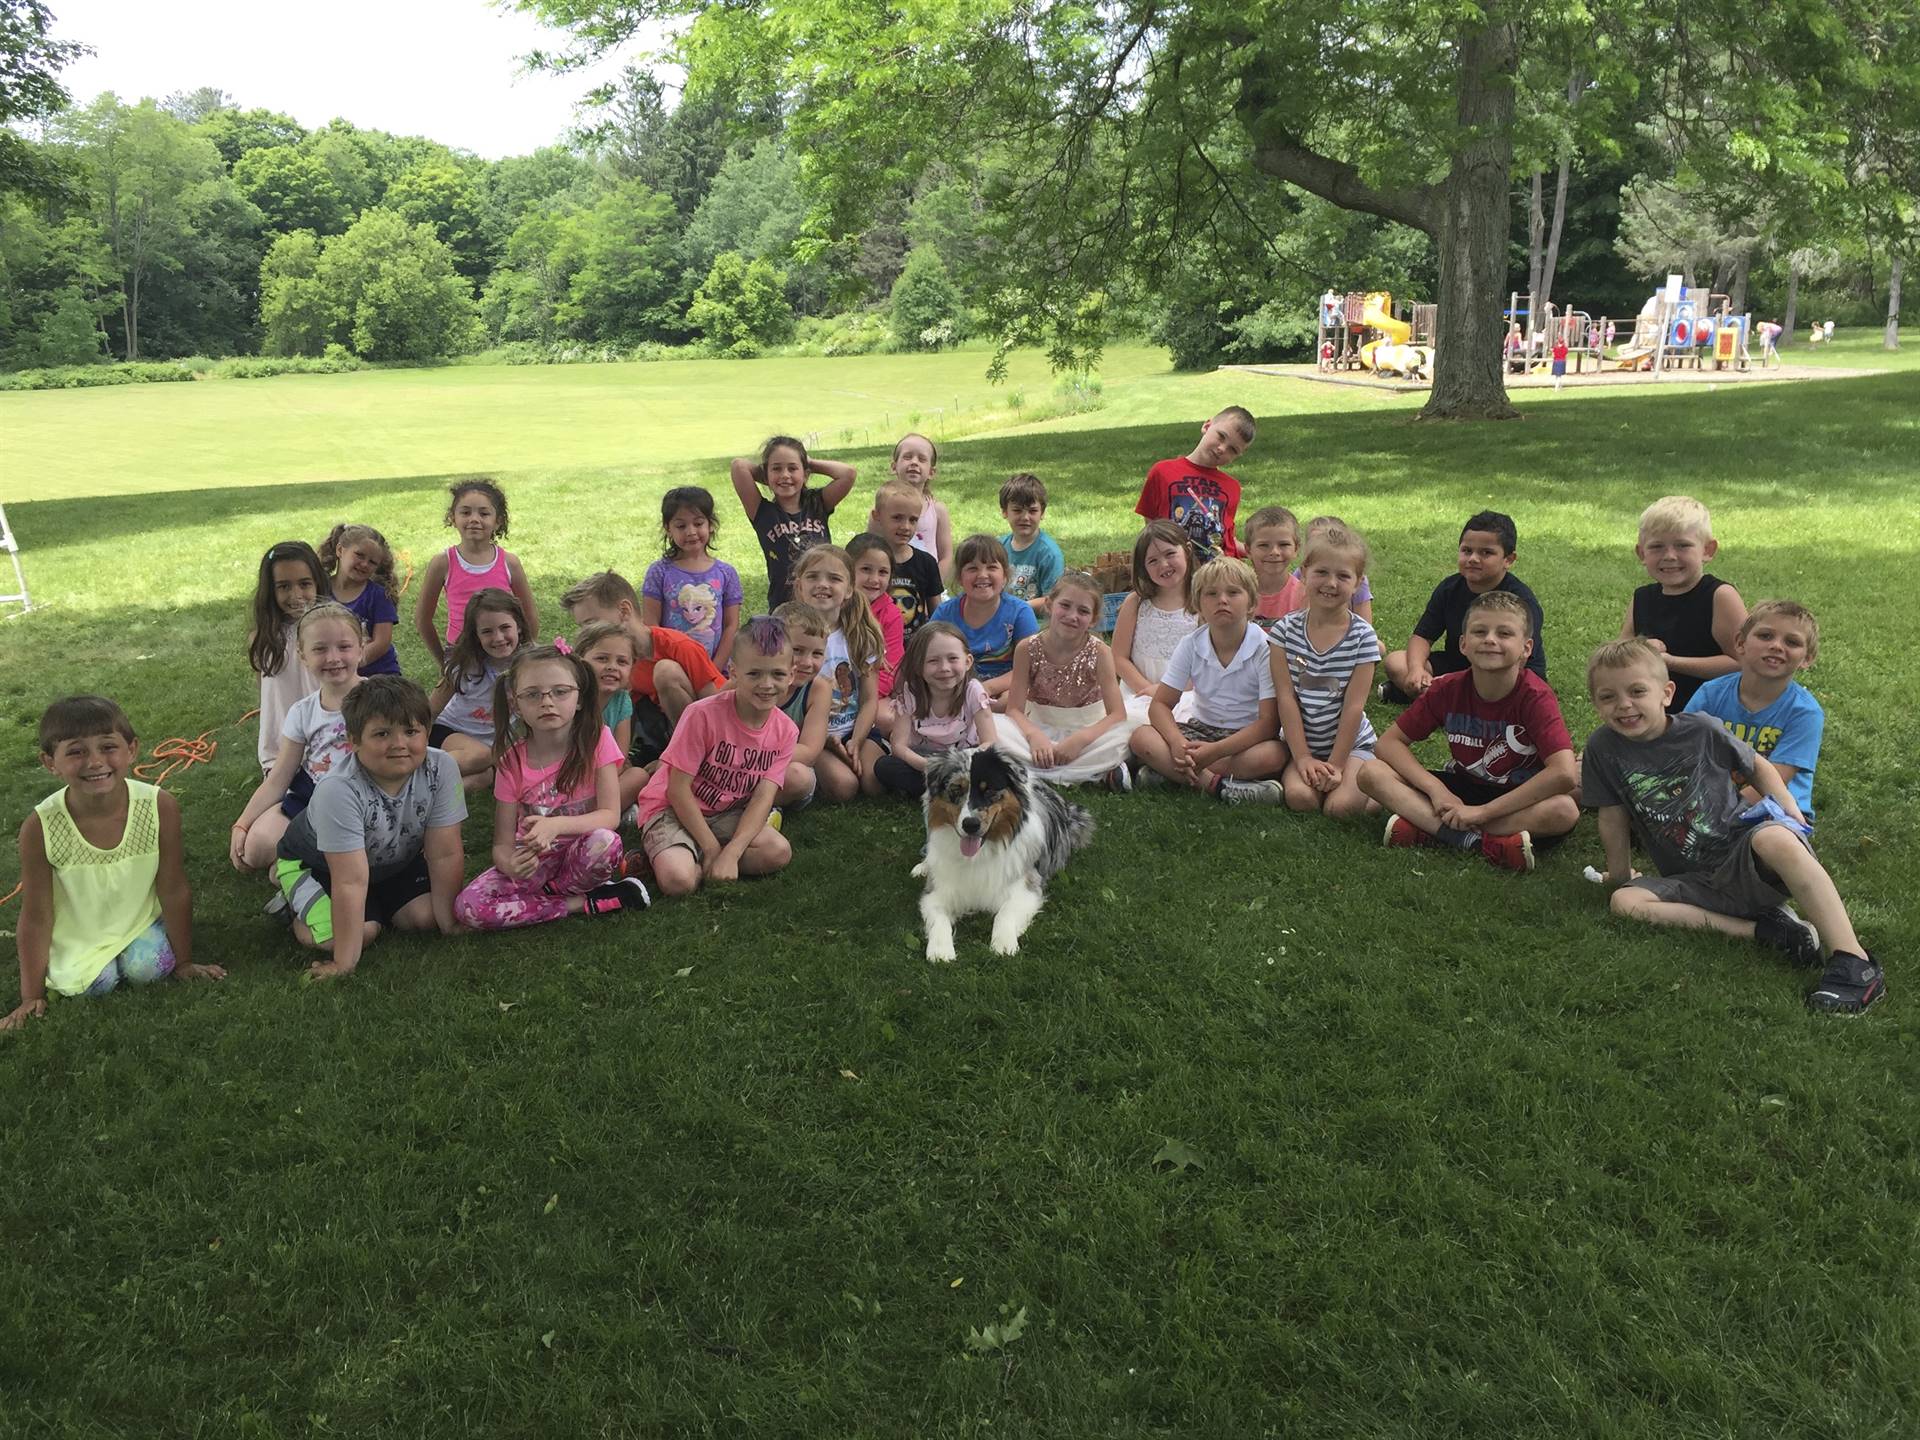 Tucker the therapy dog joins in camping fun with guilford students.